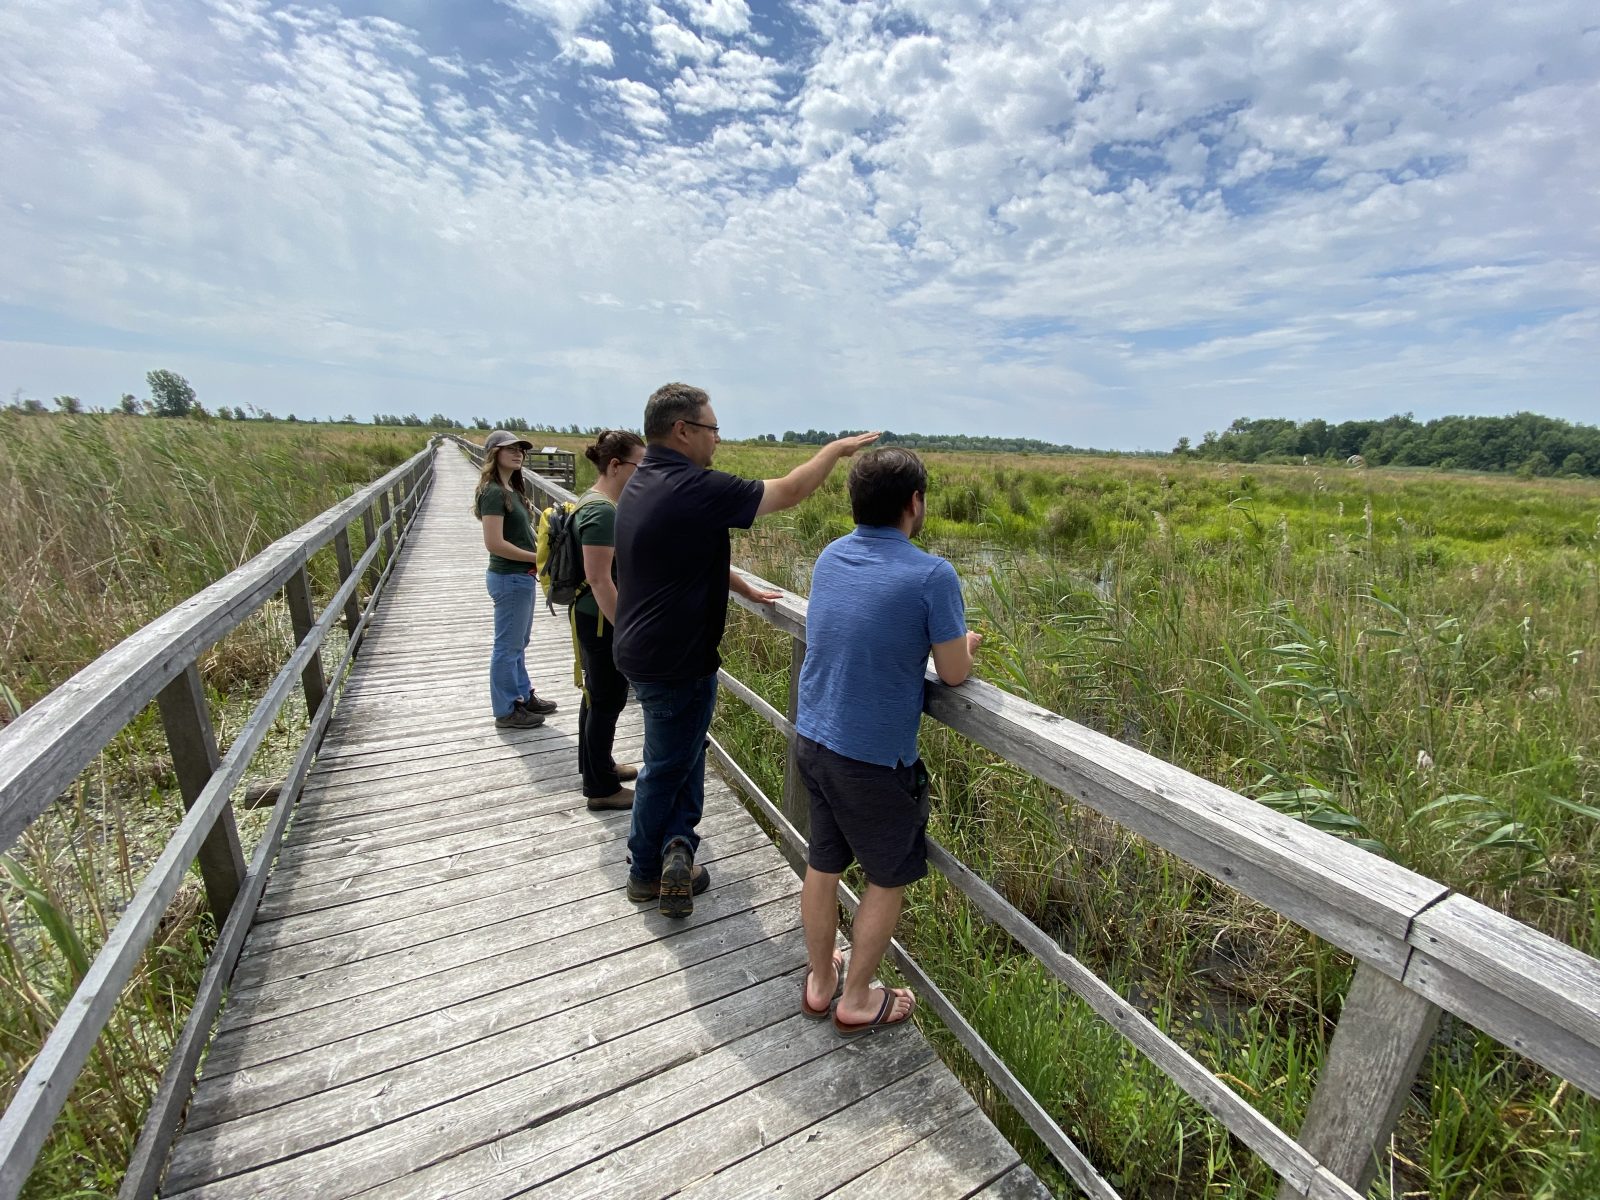 Upgrade your Nature Hikes at RRCA’s Cooper Marsh Conservation Area